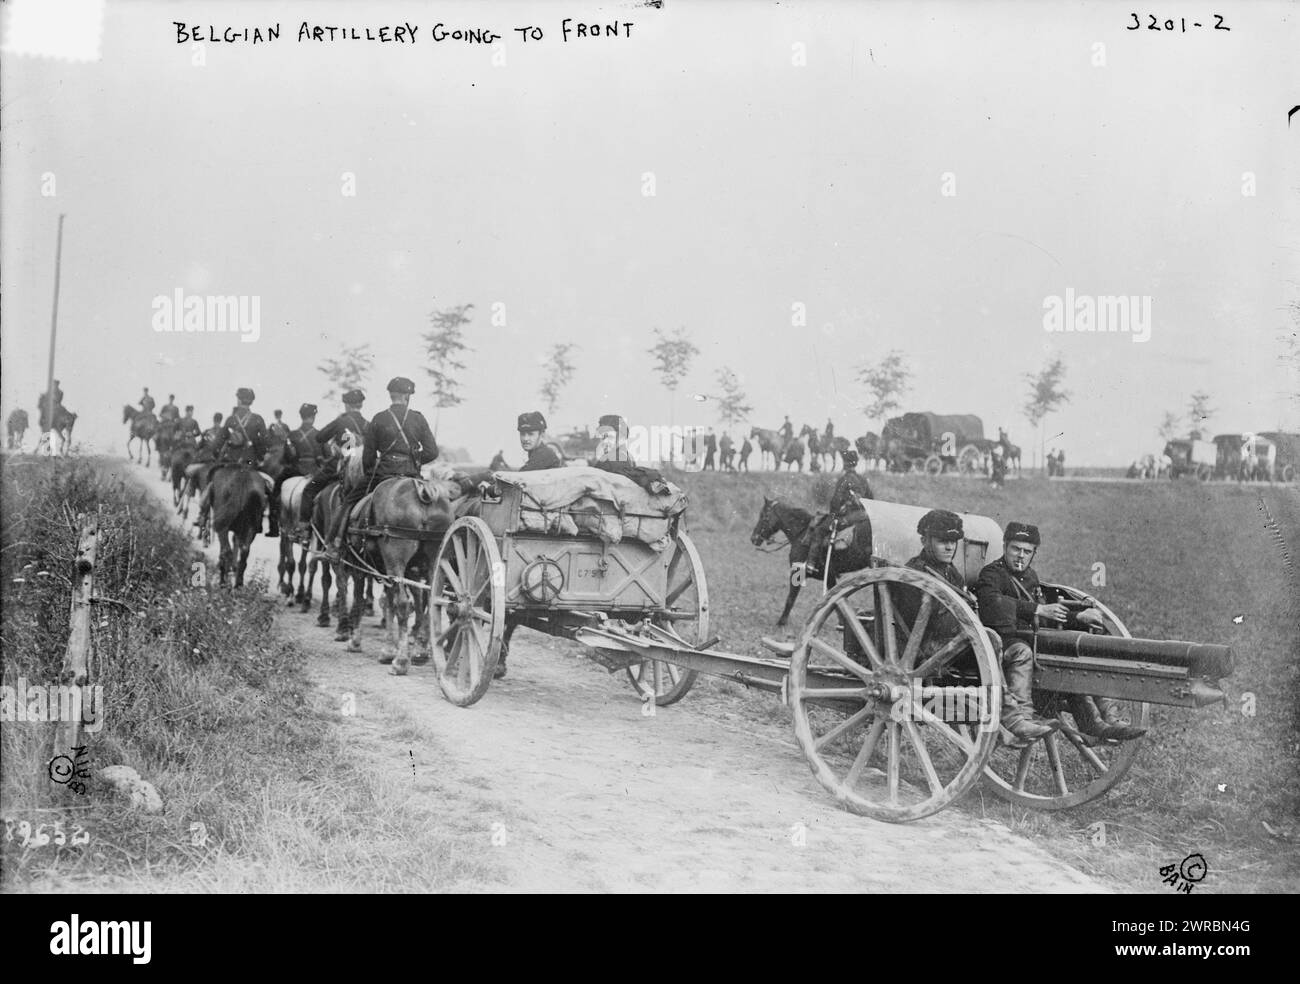 Belgian Artillery going to front, Photograph shows Belgian soldiers going to the front during World War I., between 1914 and ca. 1915, World War, 1914-1918, Glass negatives, 1 negative: glass Stock Photo